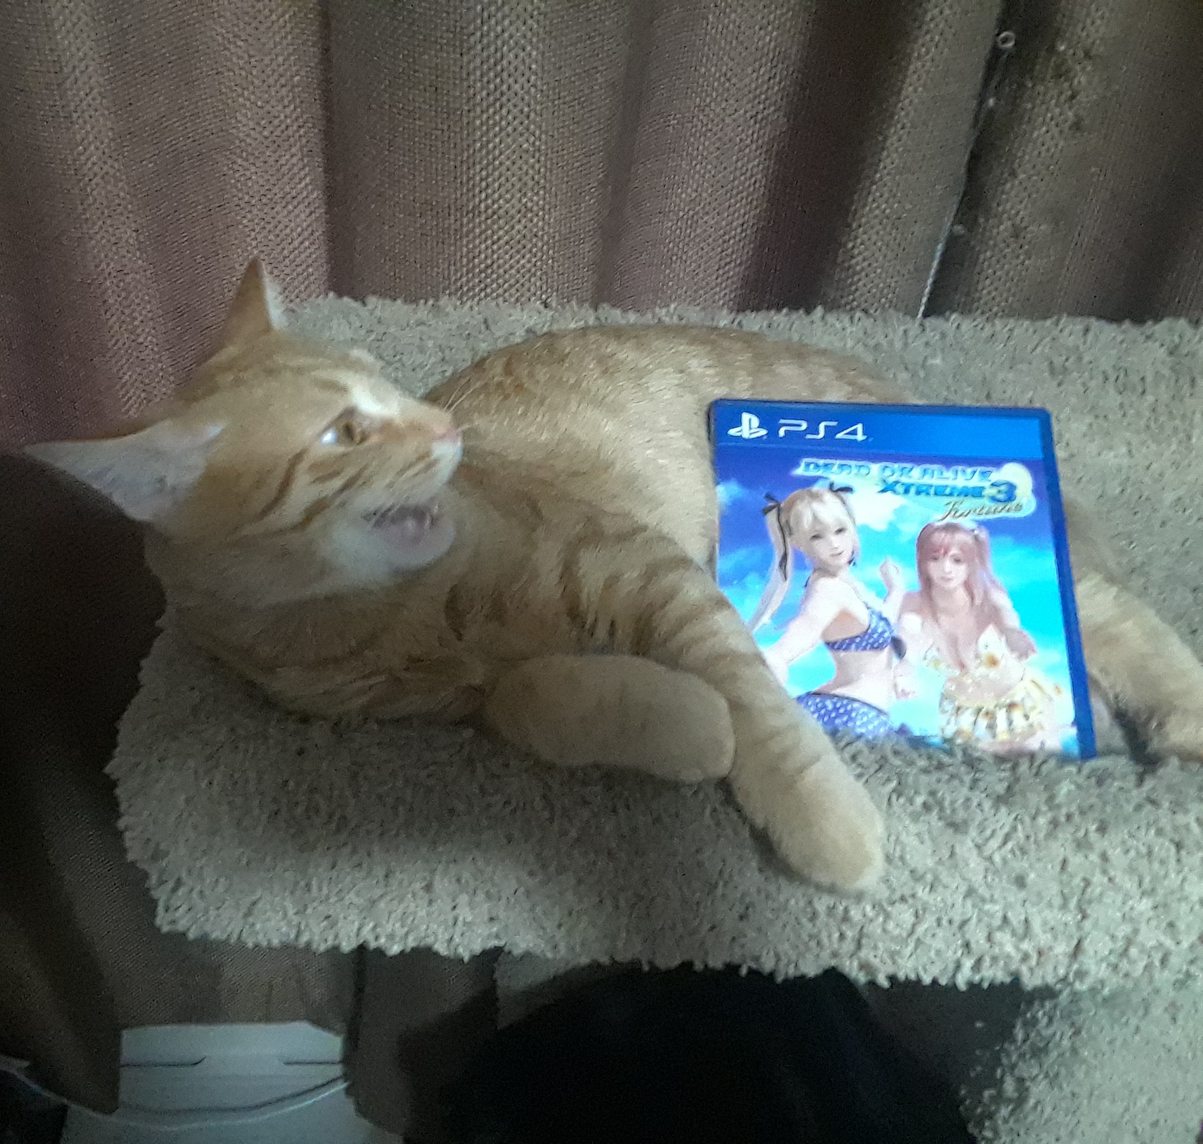 I took this for a thread on 4chan that said to post a picture of your pet with the game closest to you. I think this is the moment he realized his owner is a faggot. - meme